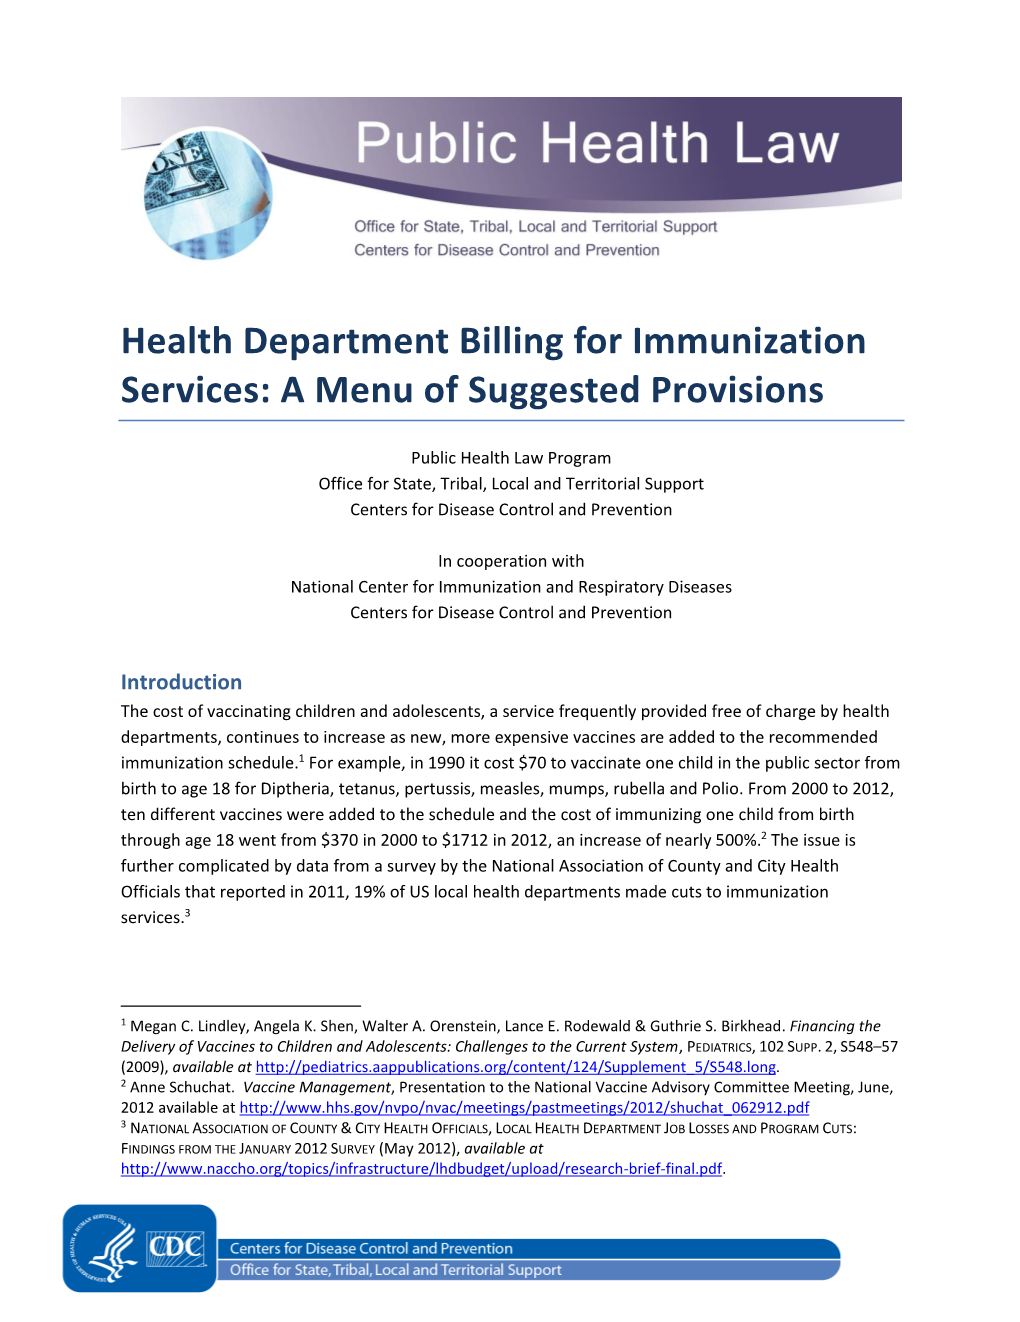 Health Department Billing for Immunization Services: a Menu of Suggested Provisions